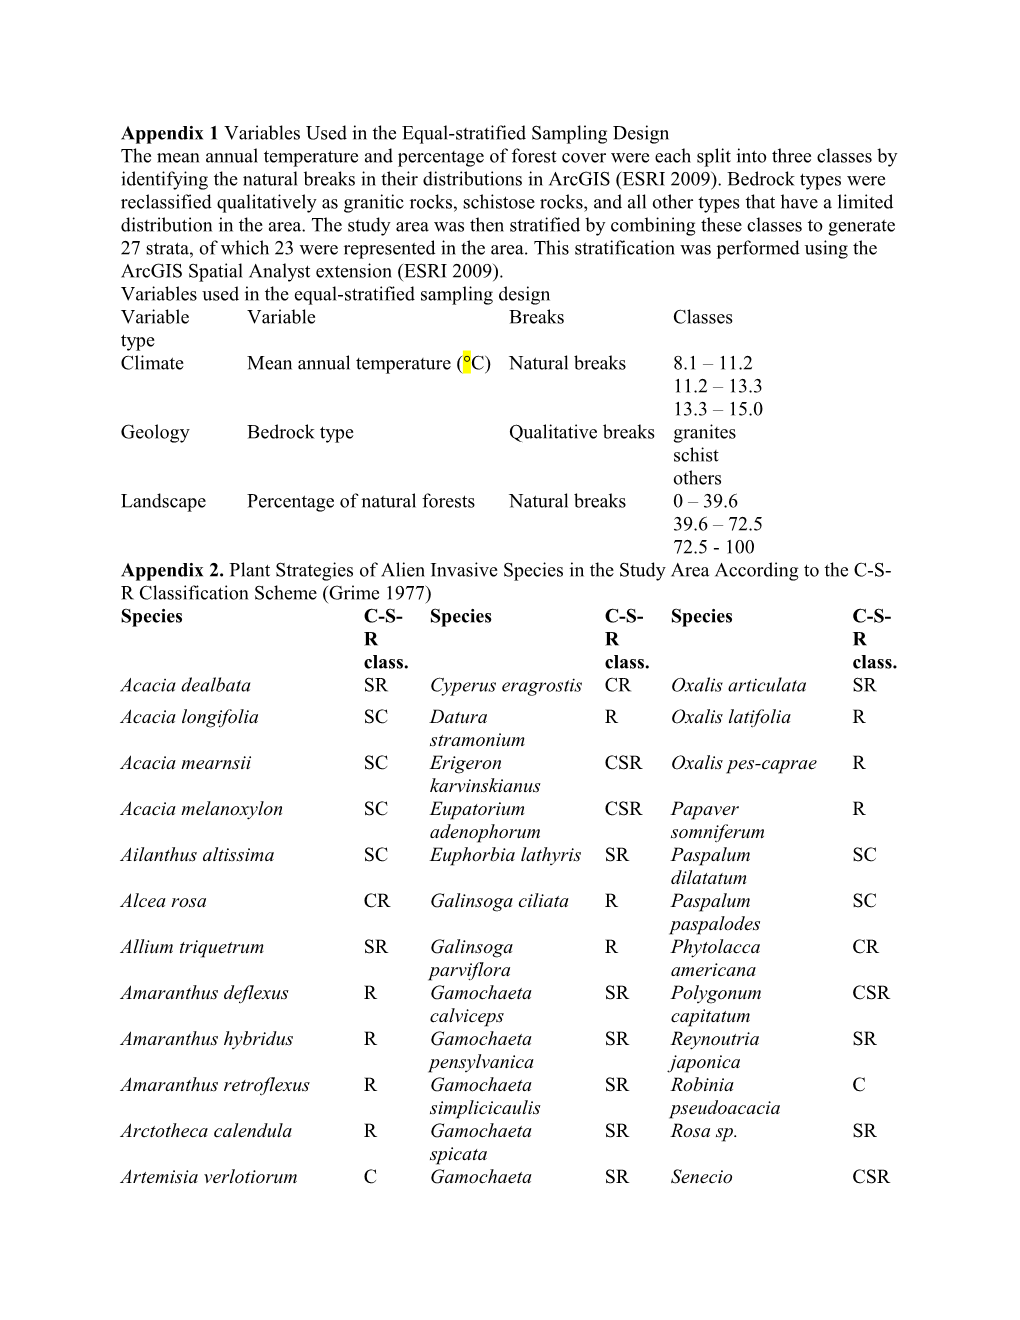 Appendix 1 Variables Used in the Equal-Stratified Sampling Design